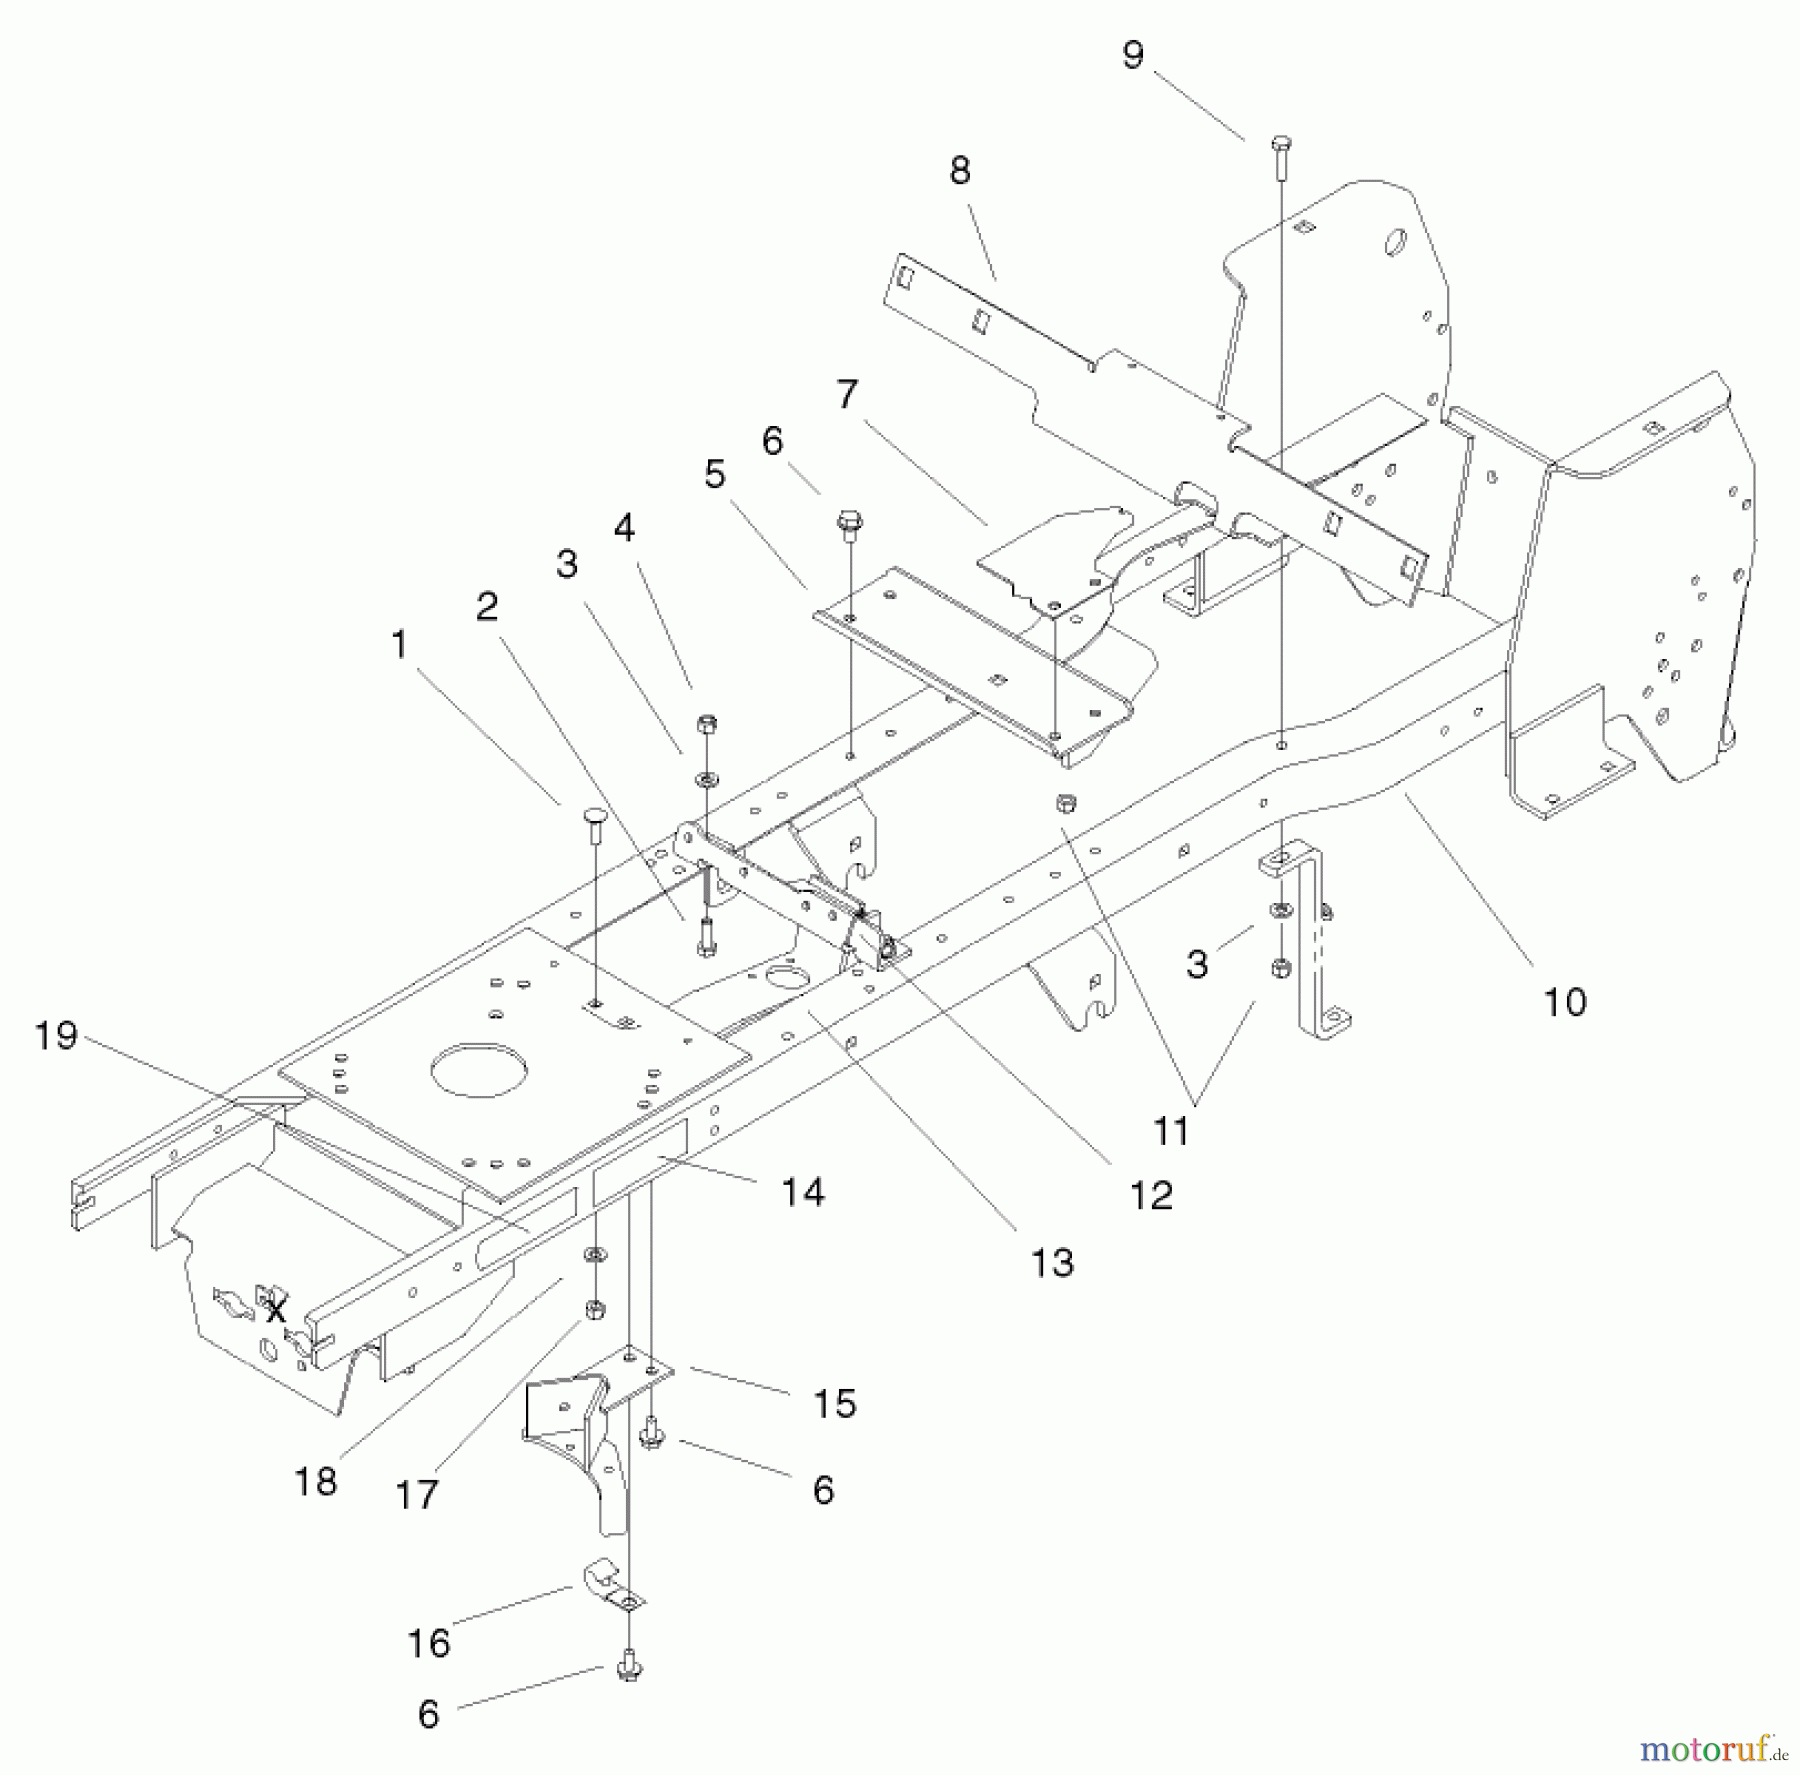  Toro Neu Mowers, Lawn & Garden Tractor Seite 1 72071 (265-H) - Toro 265-H Lawn and Garden Tractor, 2000 (200000001-200999999) FRAME ASSEMBLY